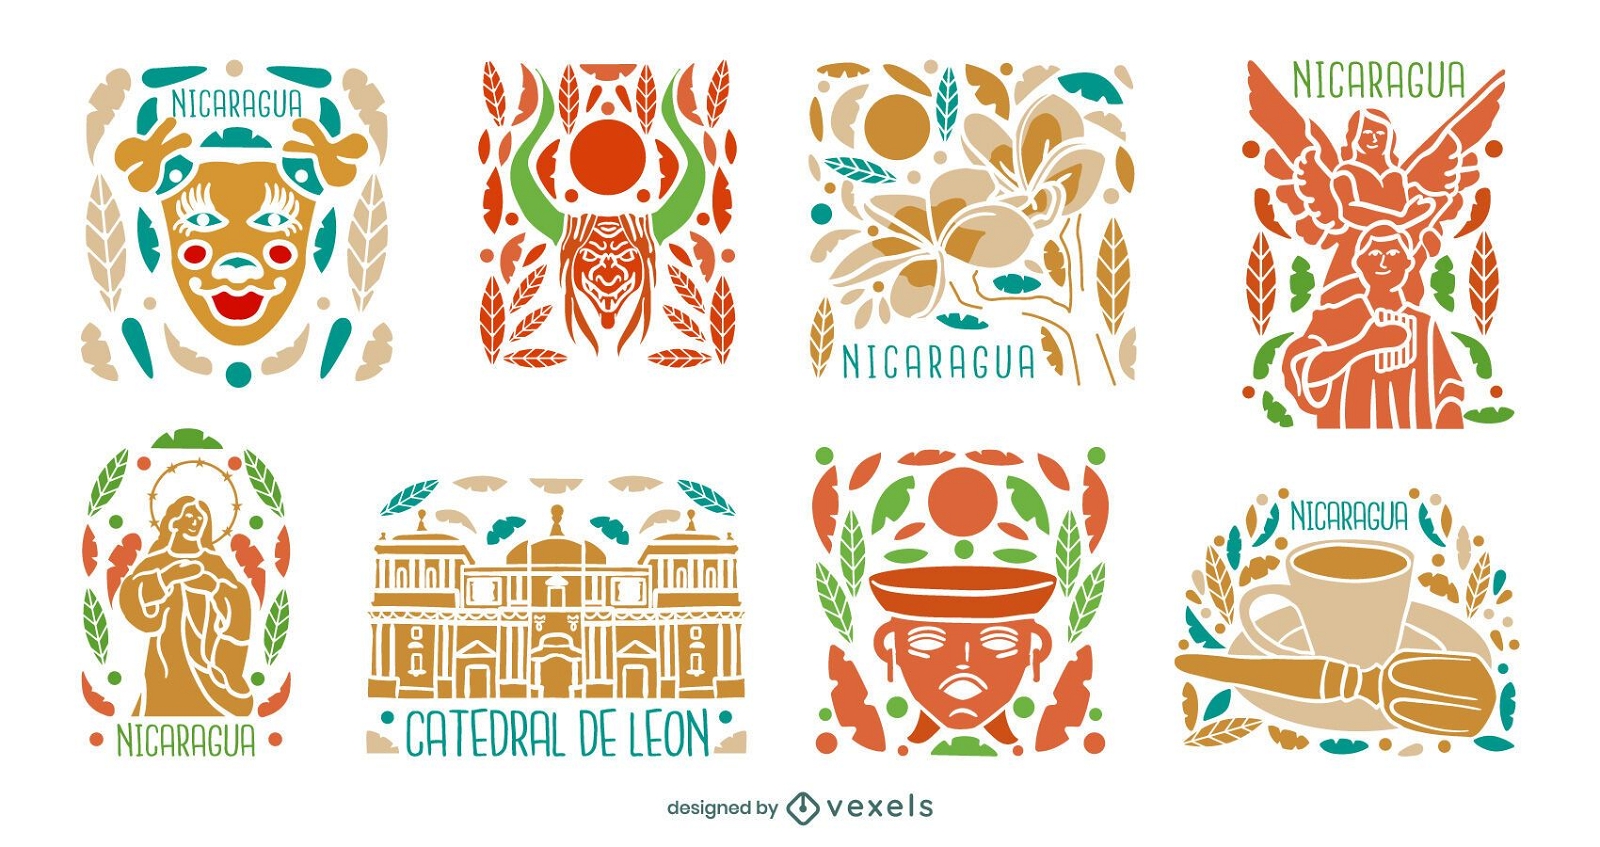 Nicaragua Illustrated Culture Elements Pack